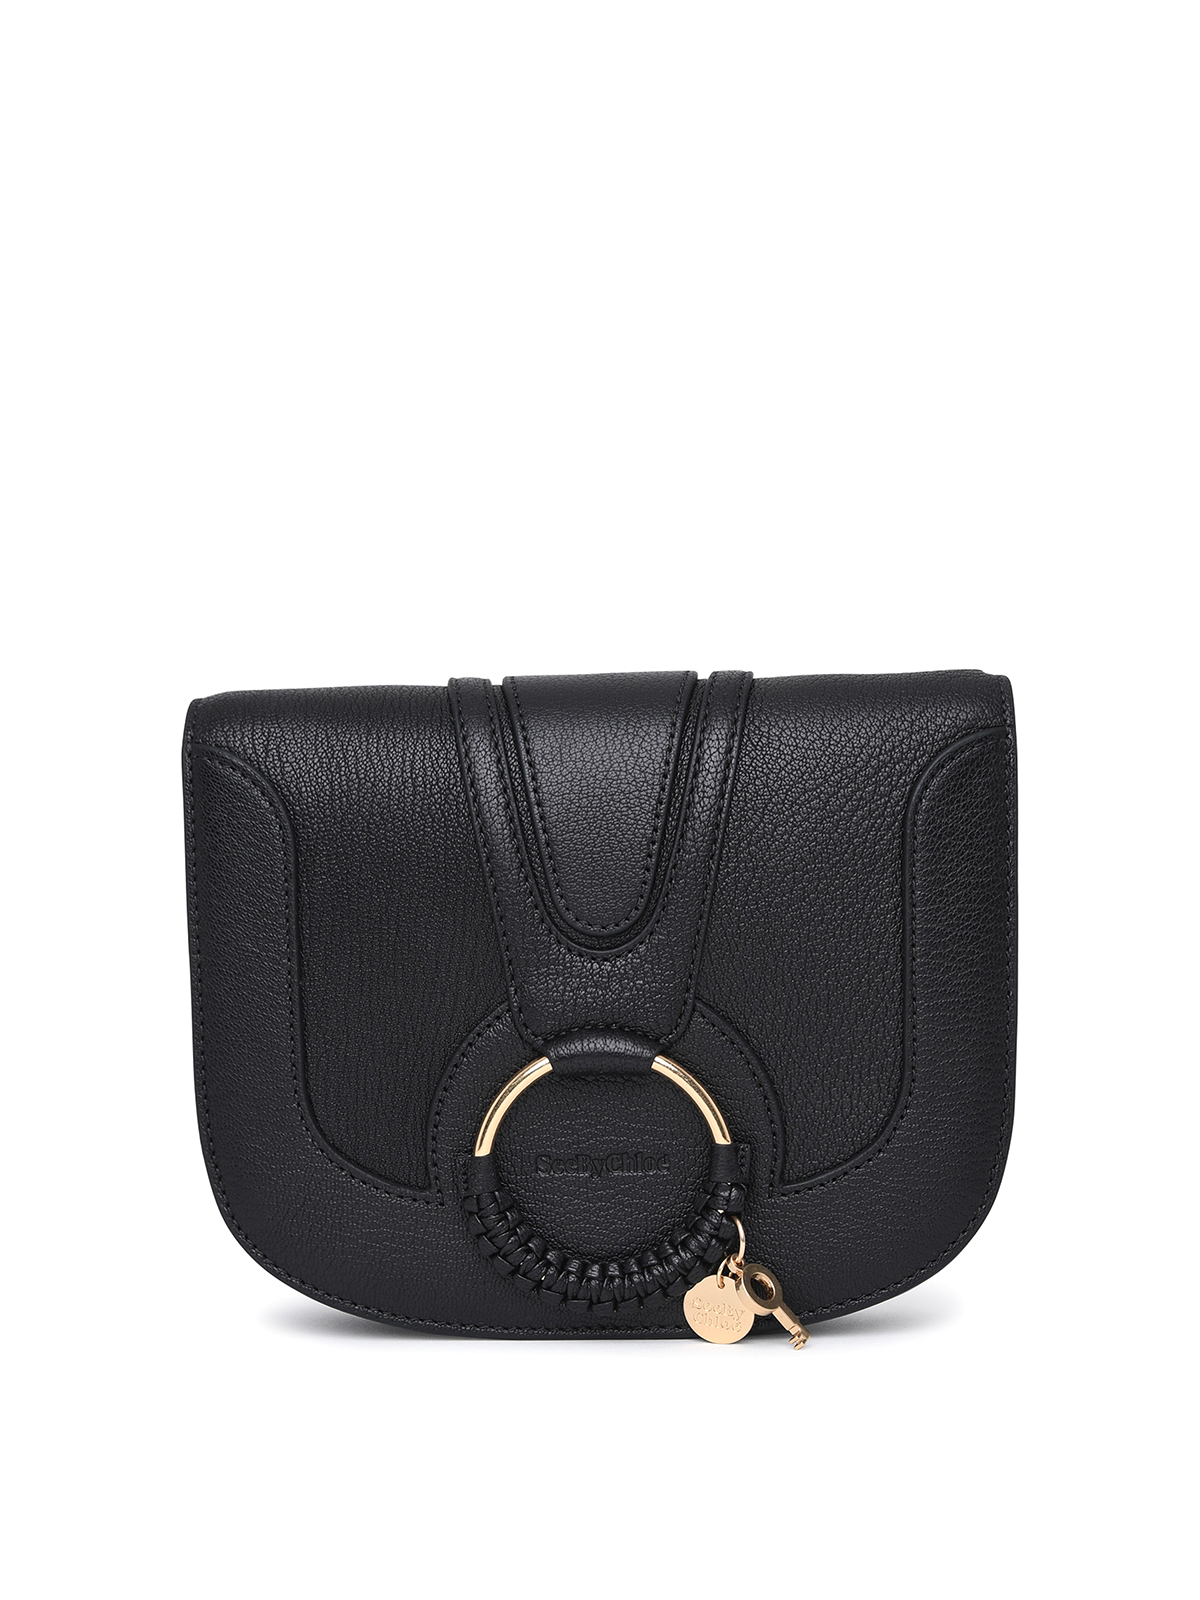 See By Chloé Large Hana Bag In Black Leather